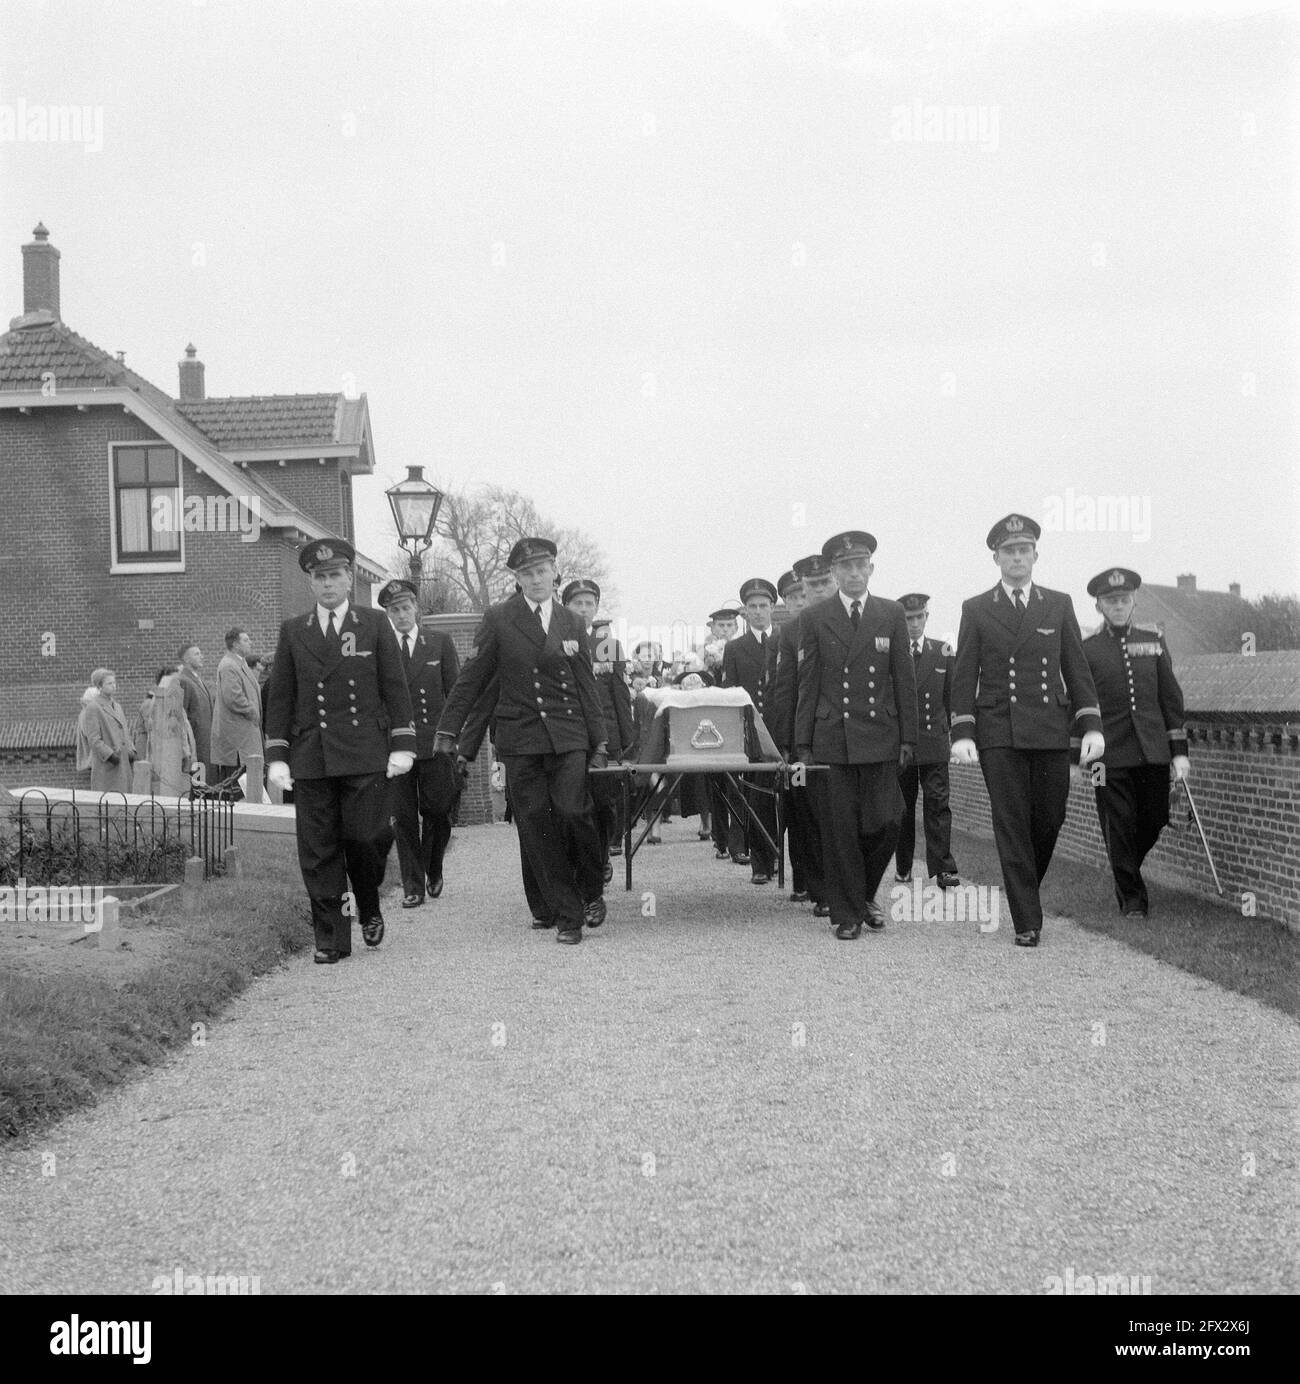 Marvo funeral Ltz. II L. Dekker at Oegstgeest, November 11, 1957, burials, The Netherlands, 20th century press agency photo, news to remember, documentary, historic photography 1945-1990, visual stories, human history of the Twentieth Century, capturing moments in time Stock Photo